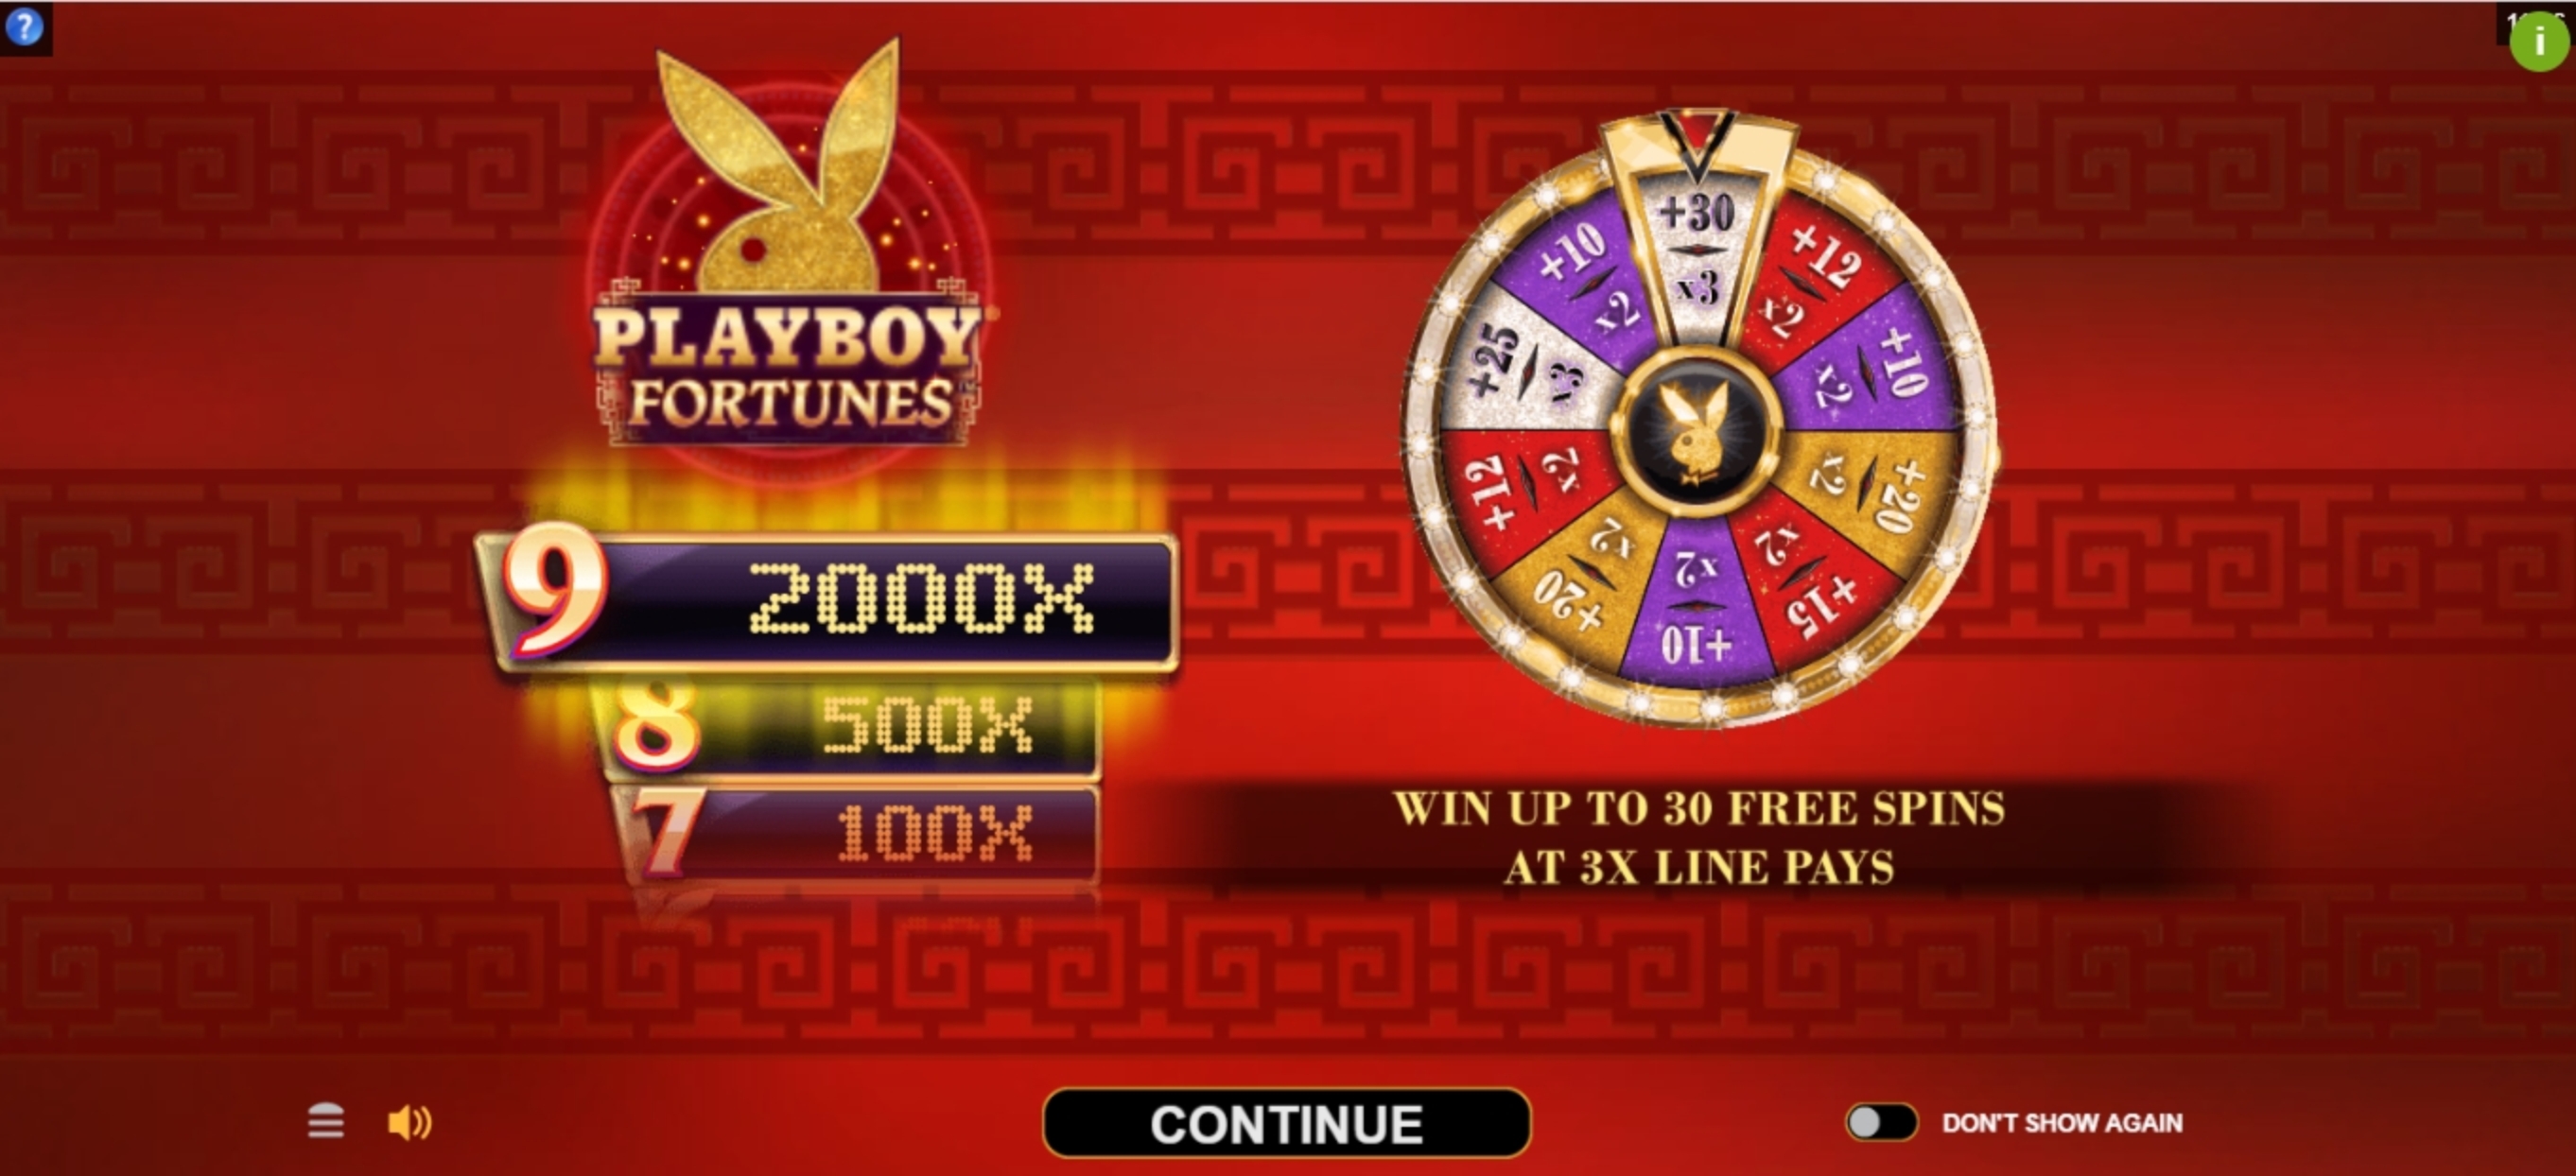 Play Playboy Fortunes Free Casino Slot Game by Gameburger Studios